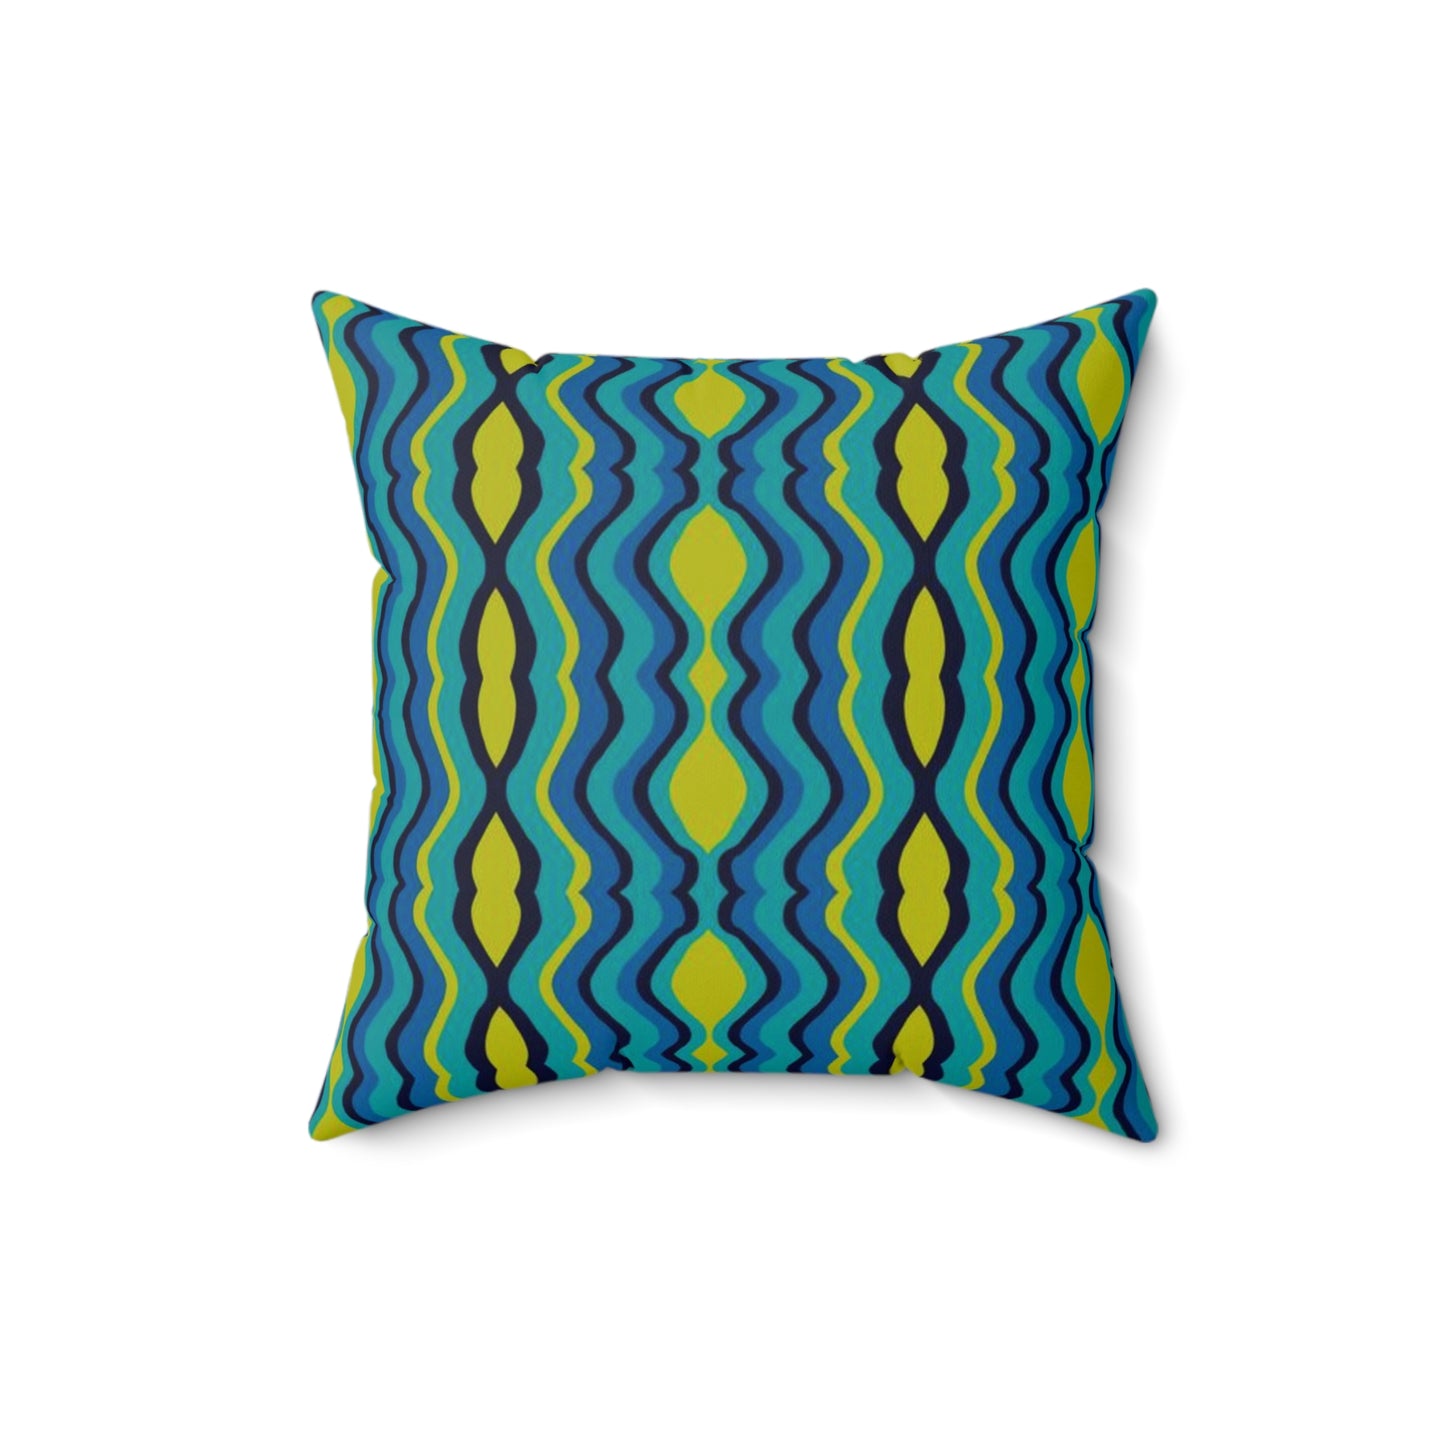 Wavy Stripes in blue and green Spun Polyester Square Pillow